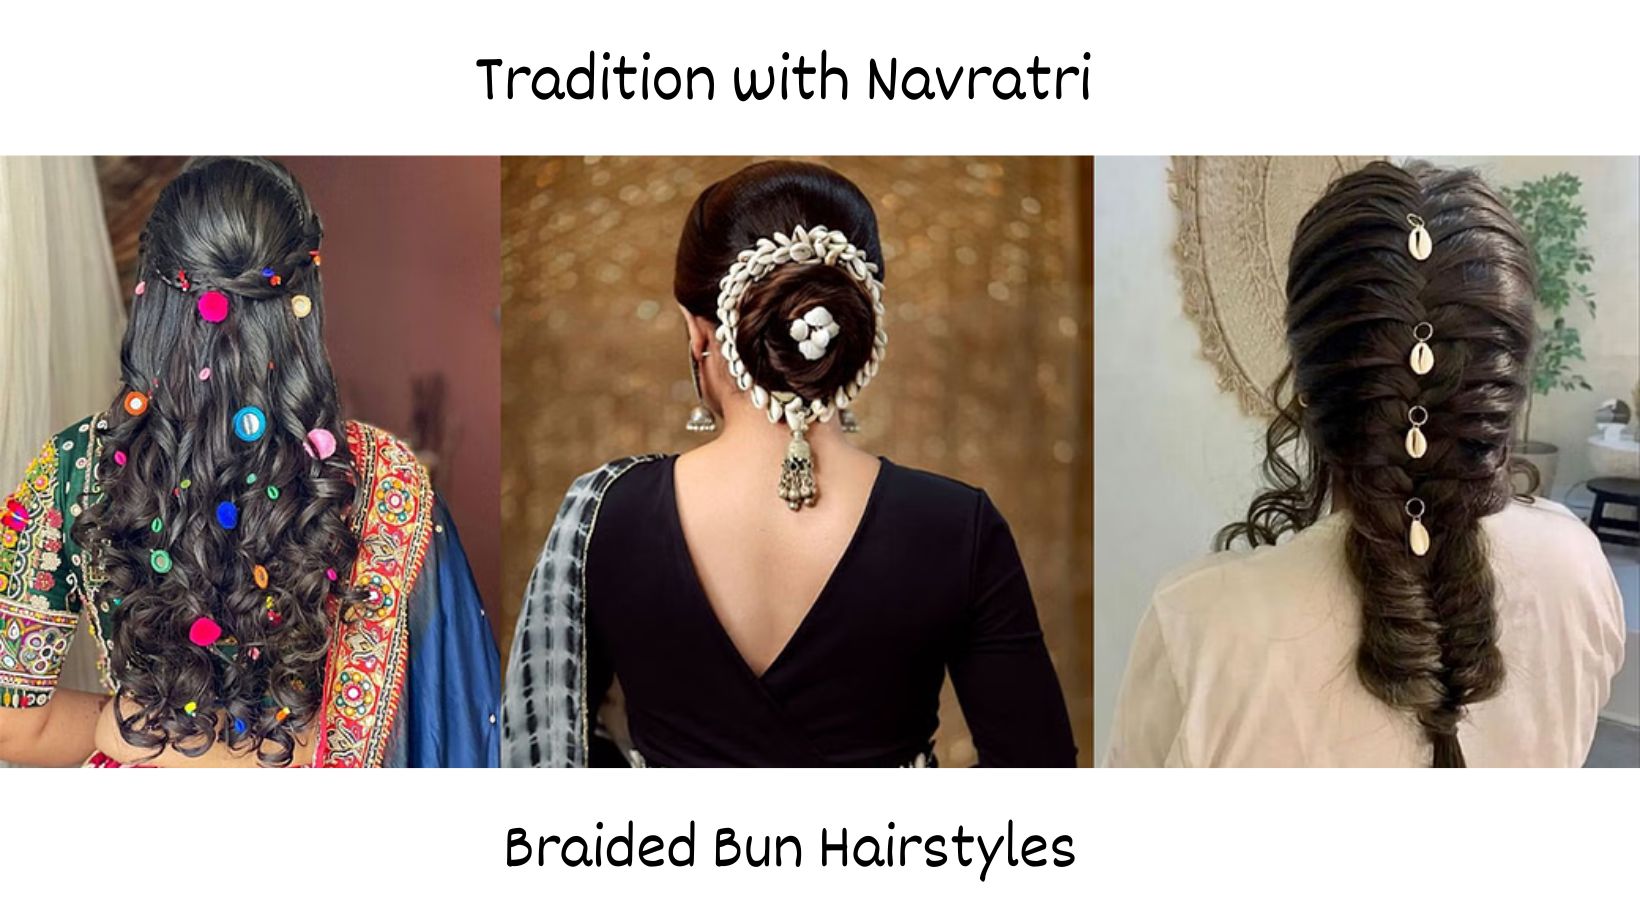 Indian Parandi Hairstyle and Hair Accessory DIY for Navratri